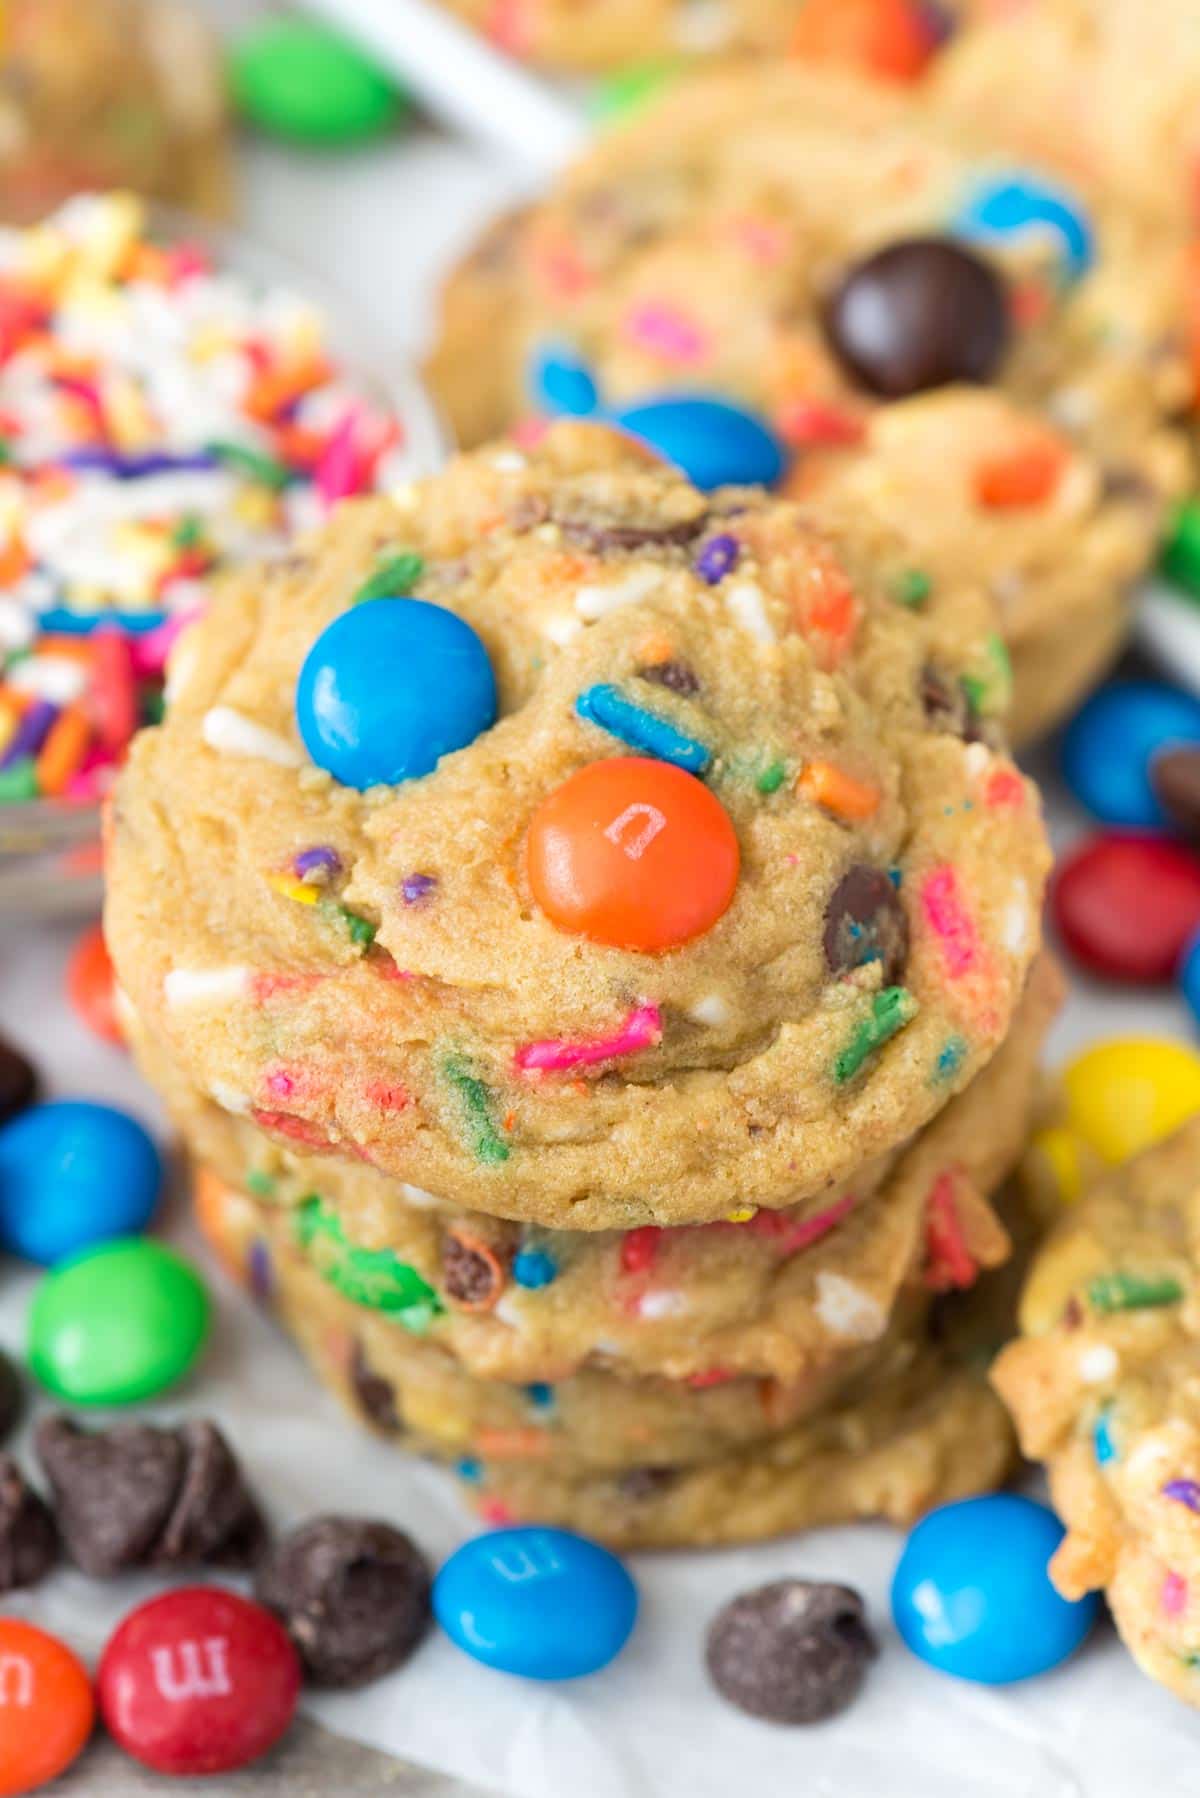 Celebration Pudding Cookies - this EASY pudding cookie recipe is filled with rainbow sprinkles and M&Ms. They're the perfect cookie to celebrate every day!